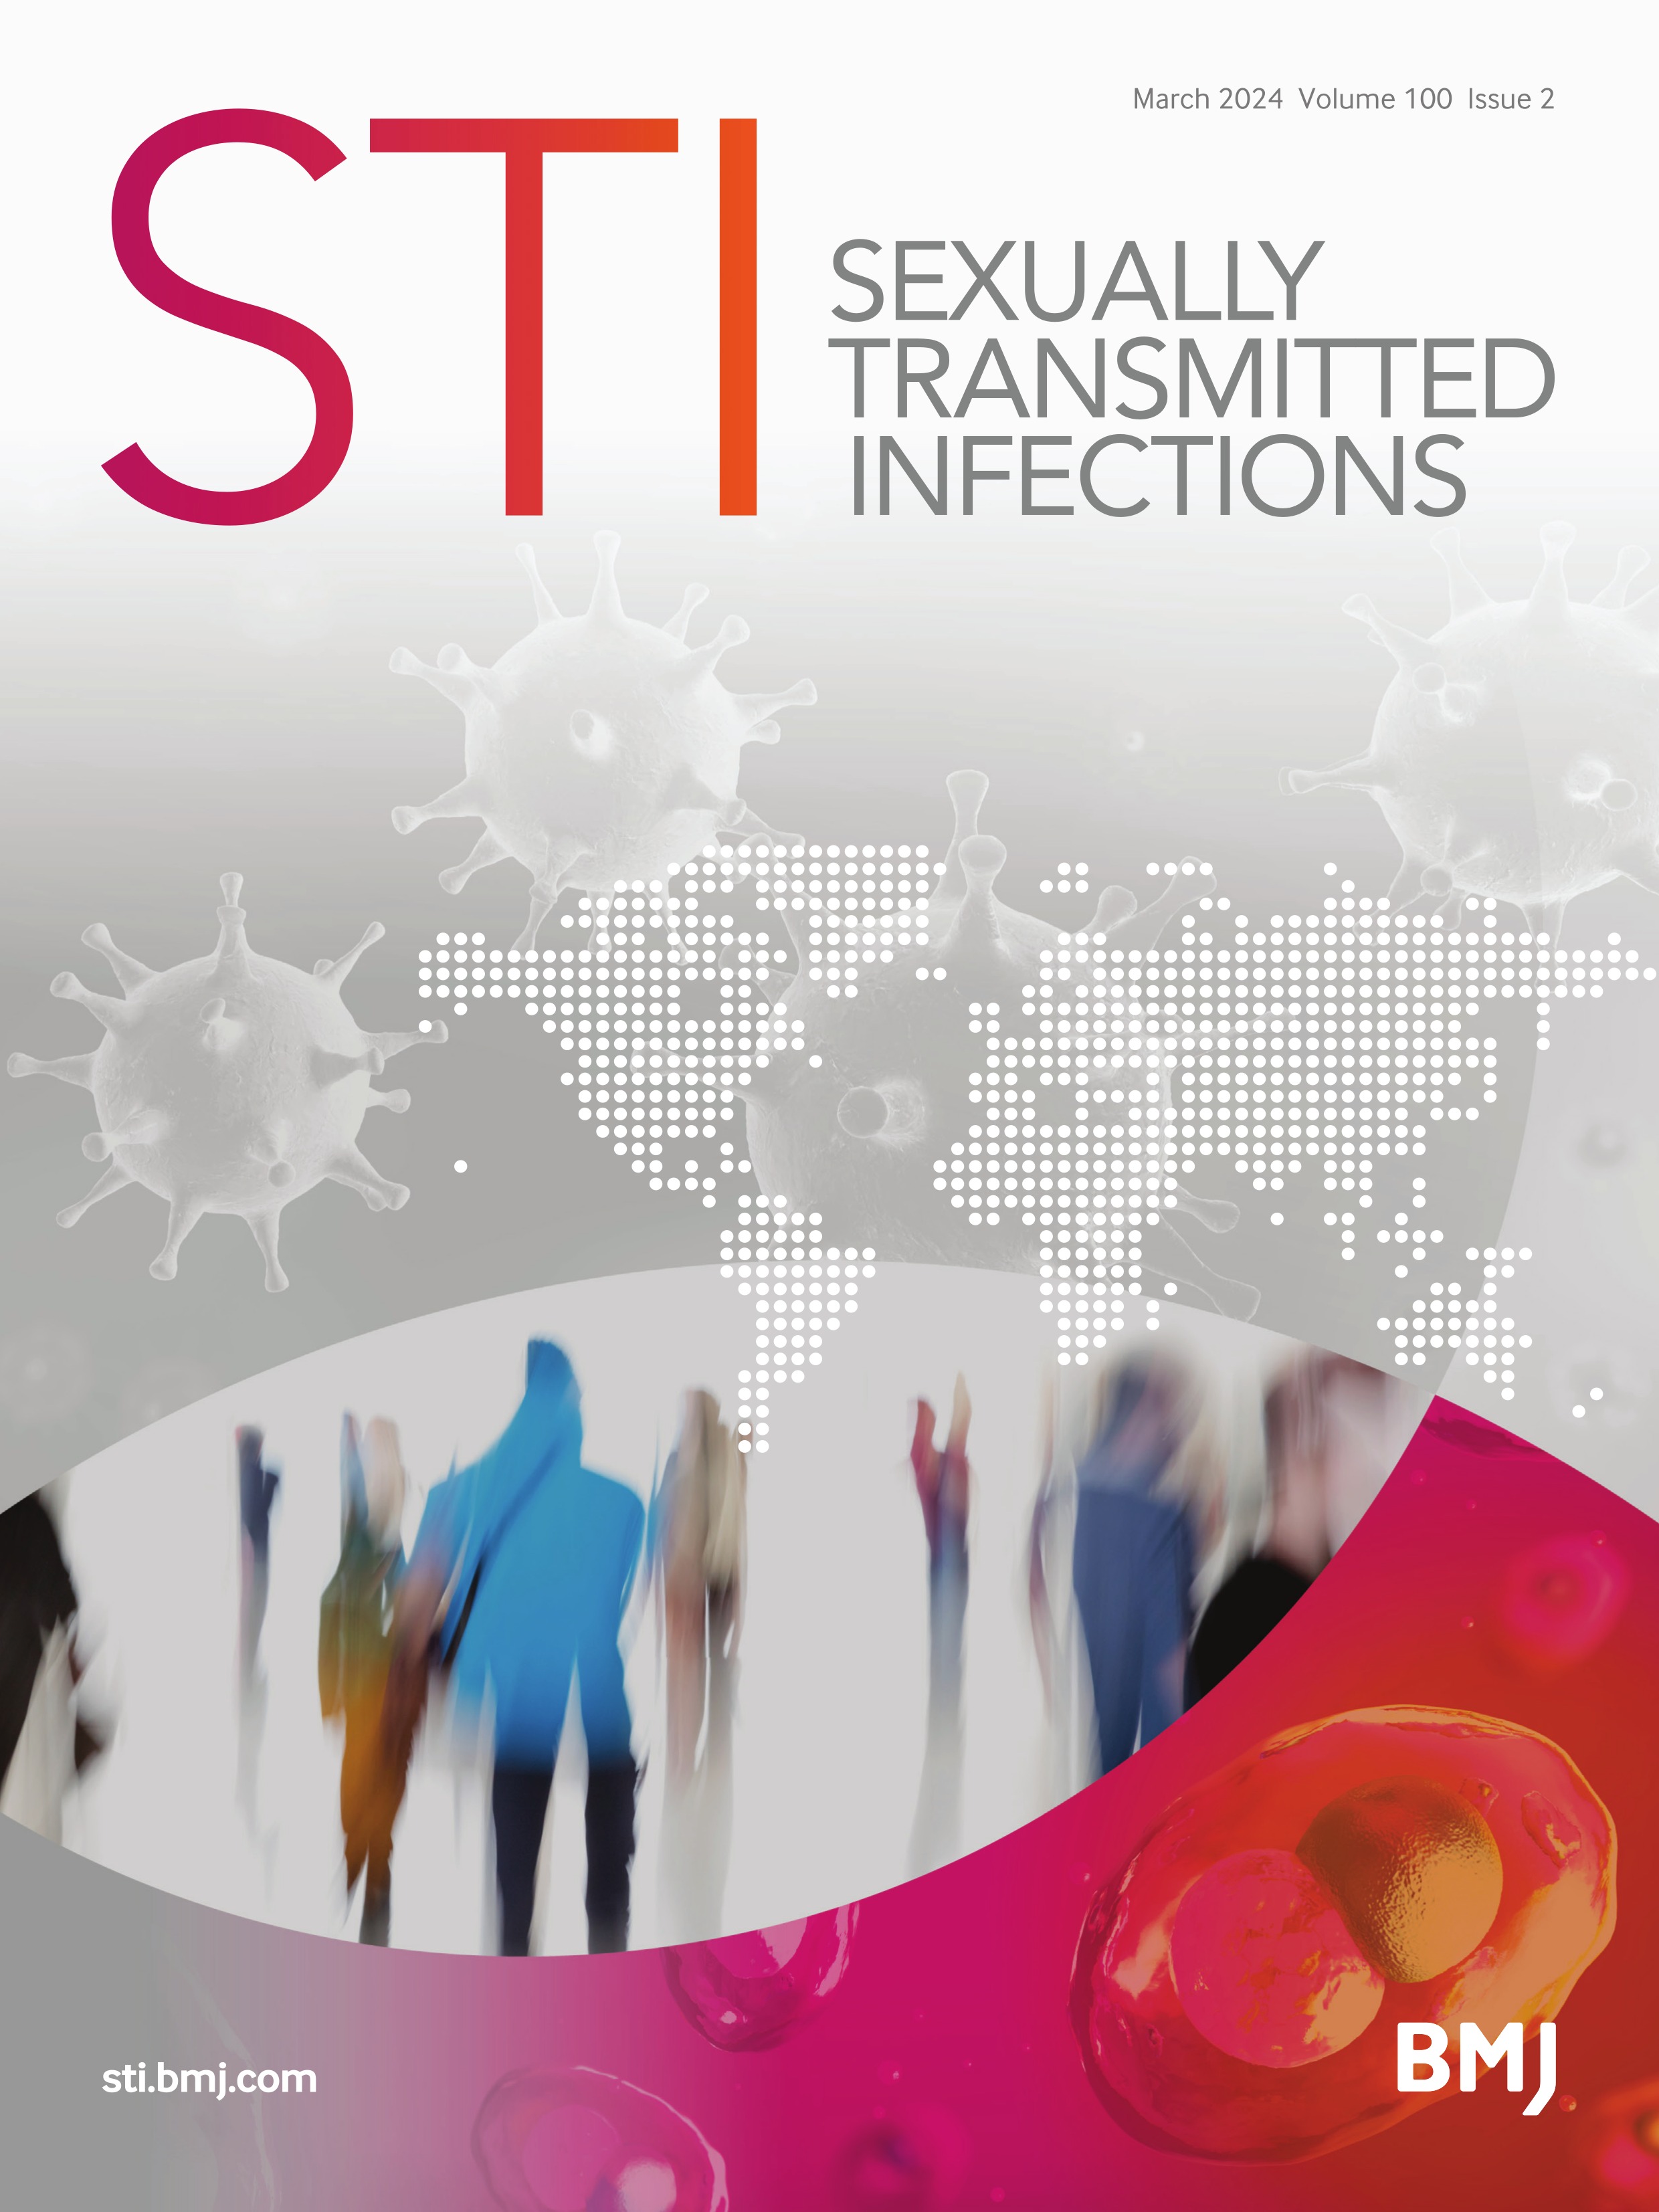 Acceptability of digital vending machines to access STI and HIV tests in two UK cities